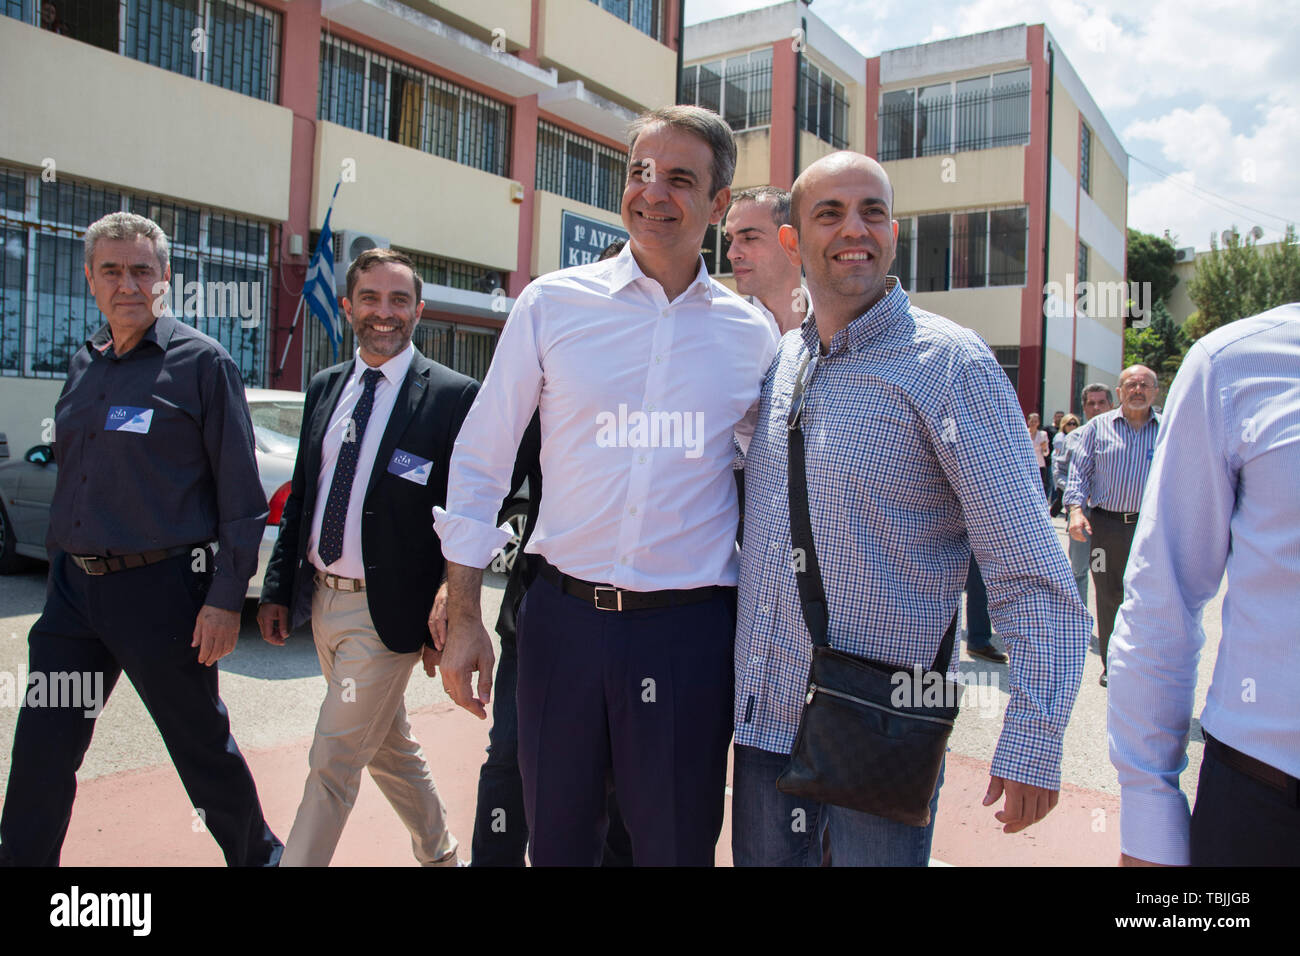 Athens, Greece. 2nd June 2019. KYRIAKOS MITSOTAKIS, conservative New Democracy leader casts his vote on the second round of the municipal elections. Greeks voted for mayors and regional governors while national parliamentary elections, after the governing party SYRIZA's defeat in the recent European parliamentary elections, are scheduled on July 7th 2019.© Nikolas Georgiou / Alamy Live News Stock Photo